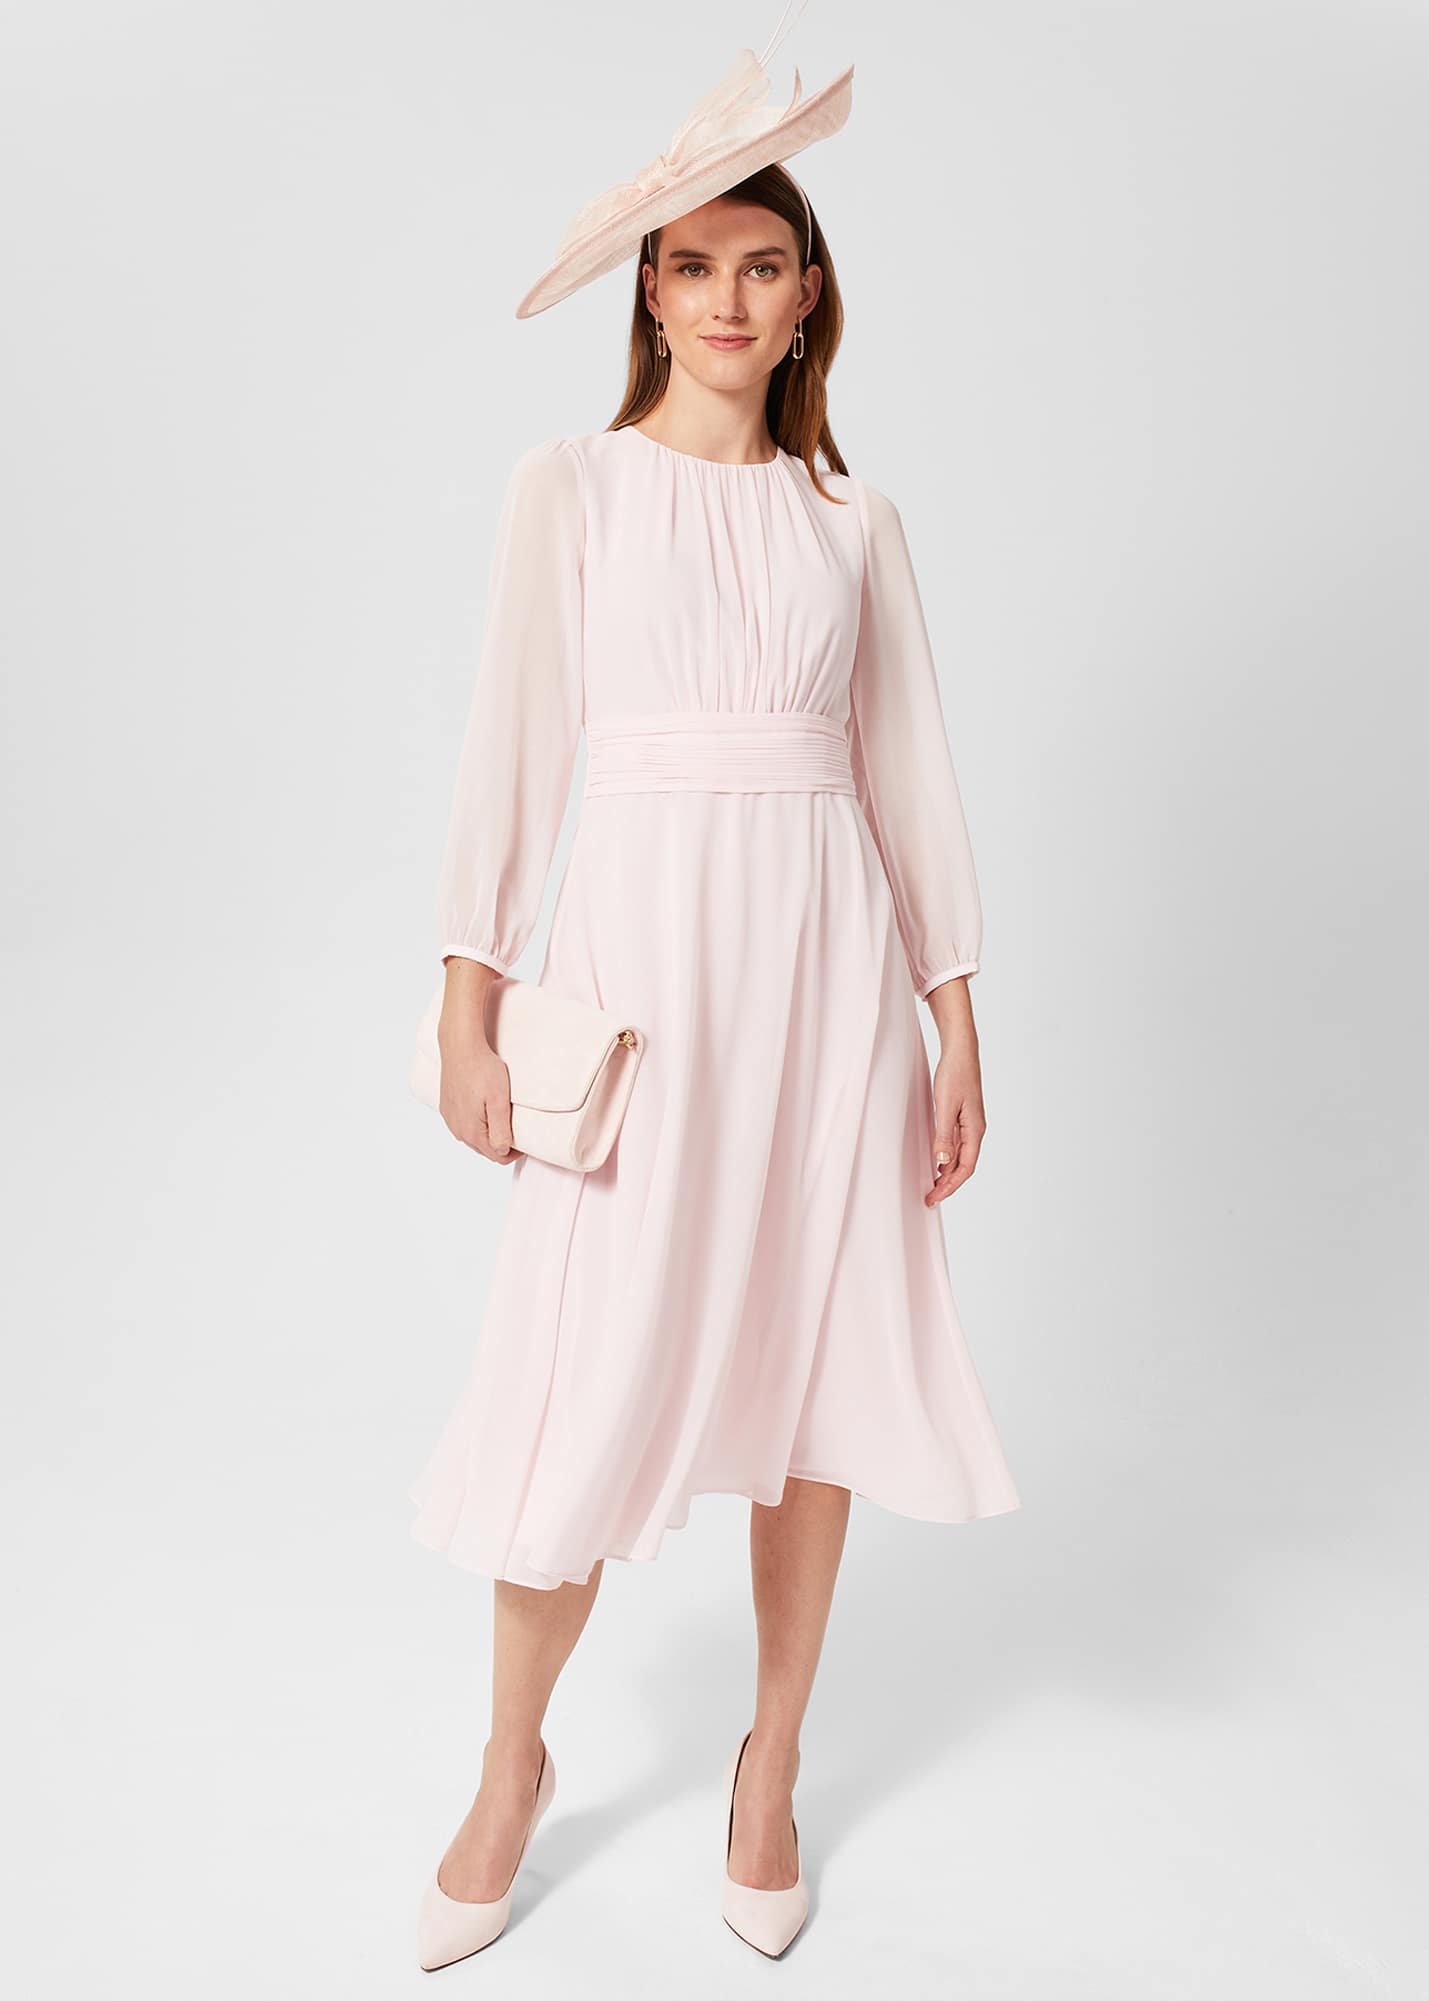 Hobbs Women's Arianne Fit And Flare Dress - Pale Pink